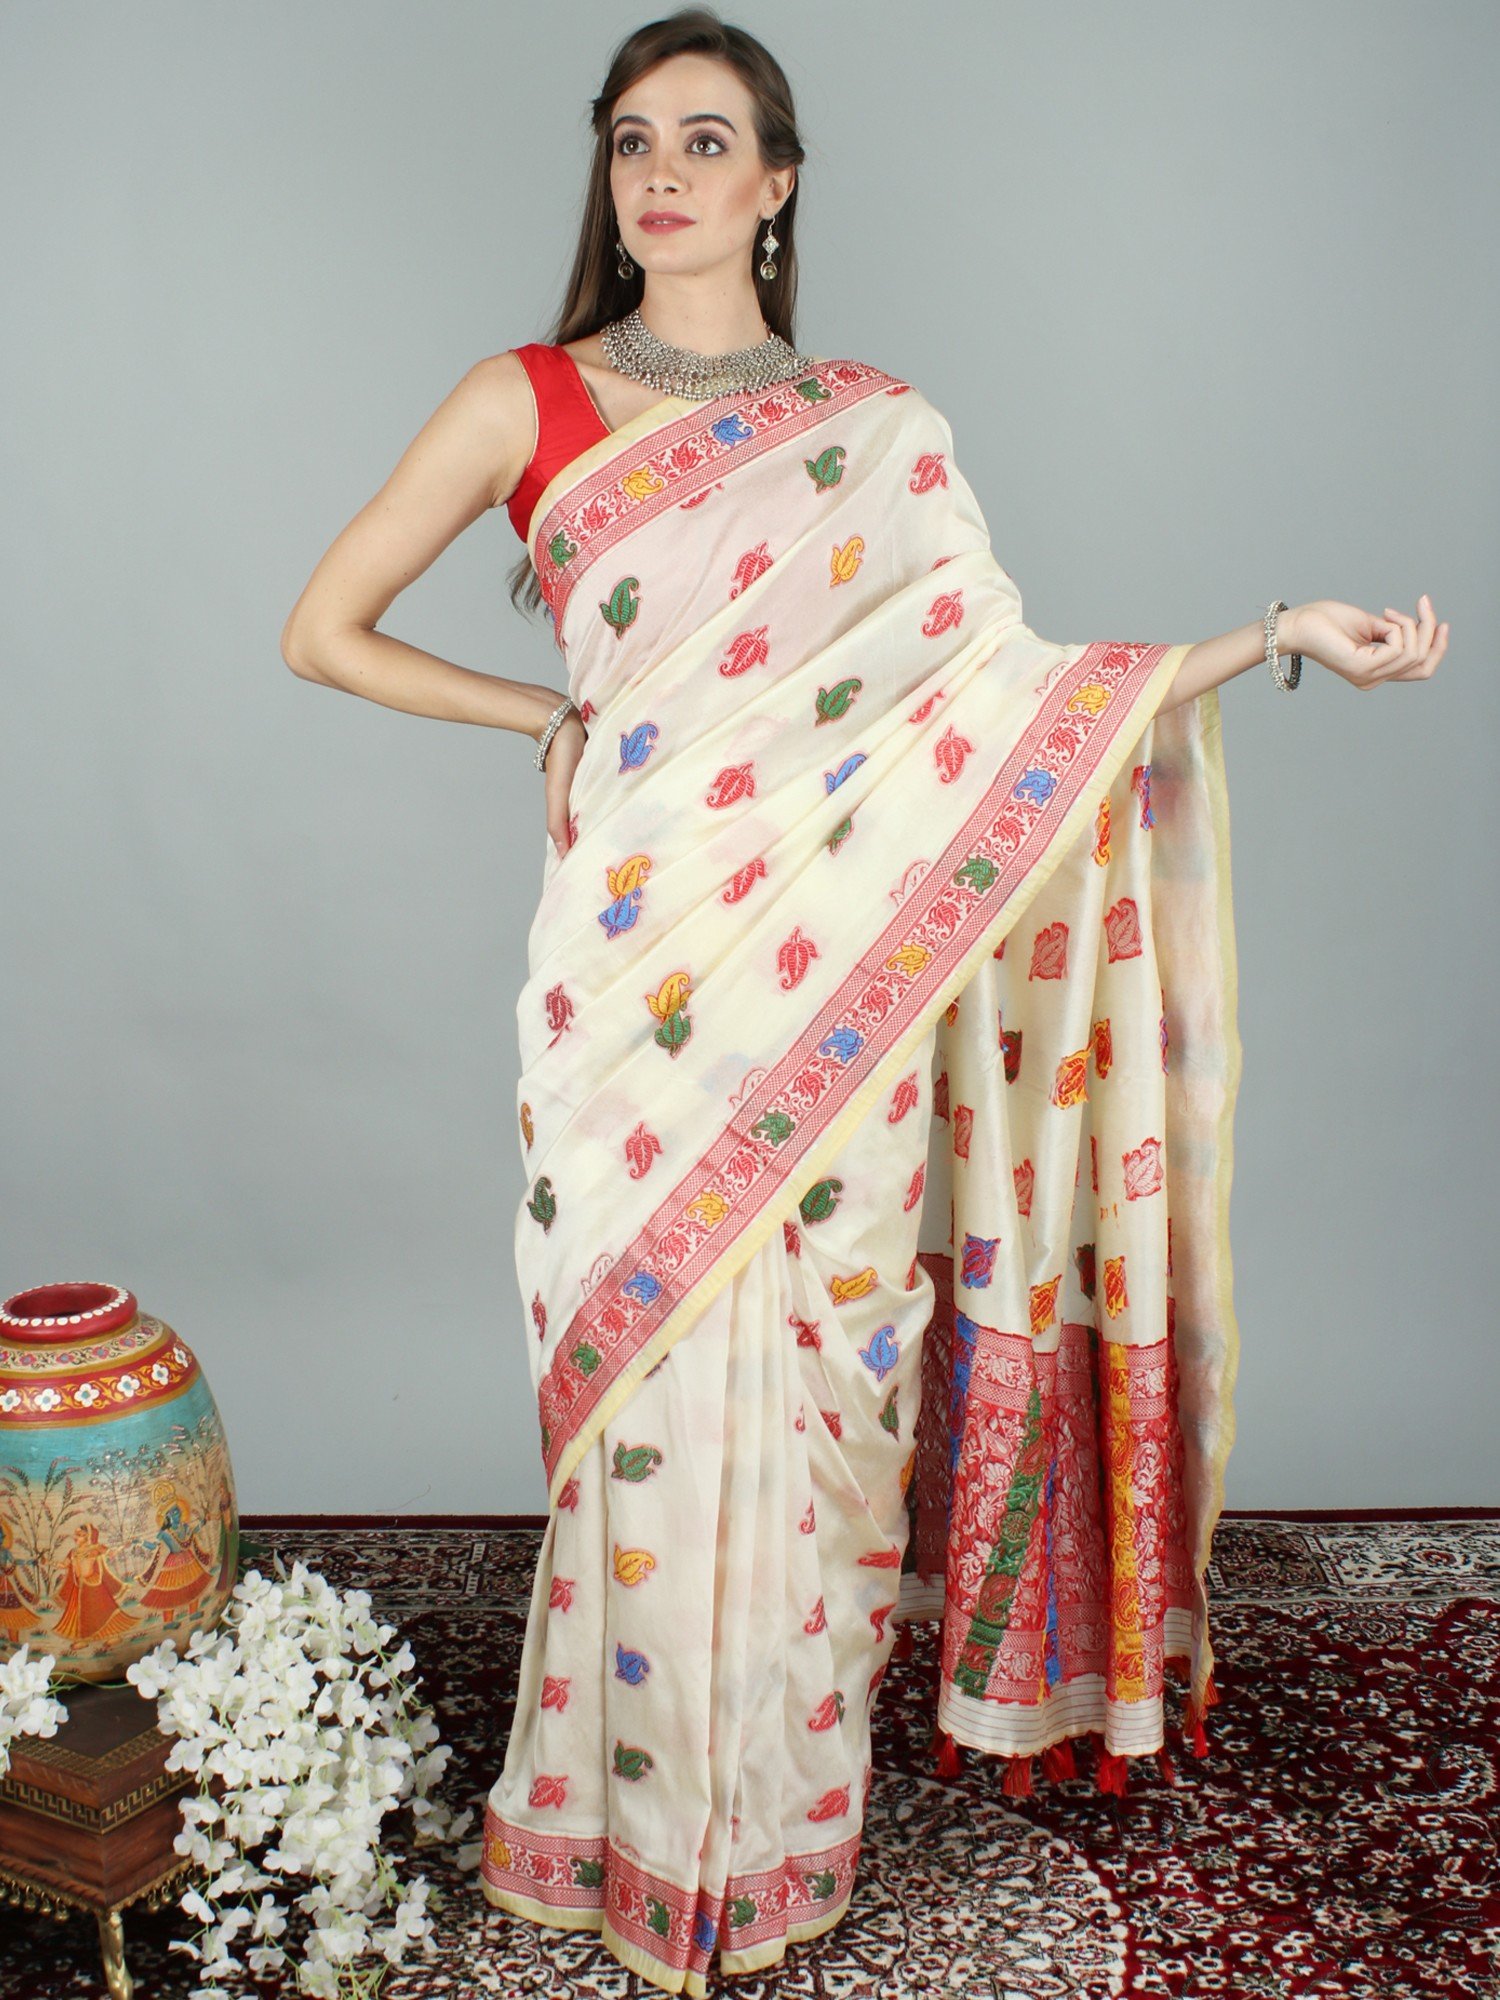 Winter-White Art Silk Sari From Assam With Woven Paisley-Flower All ...